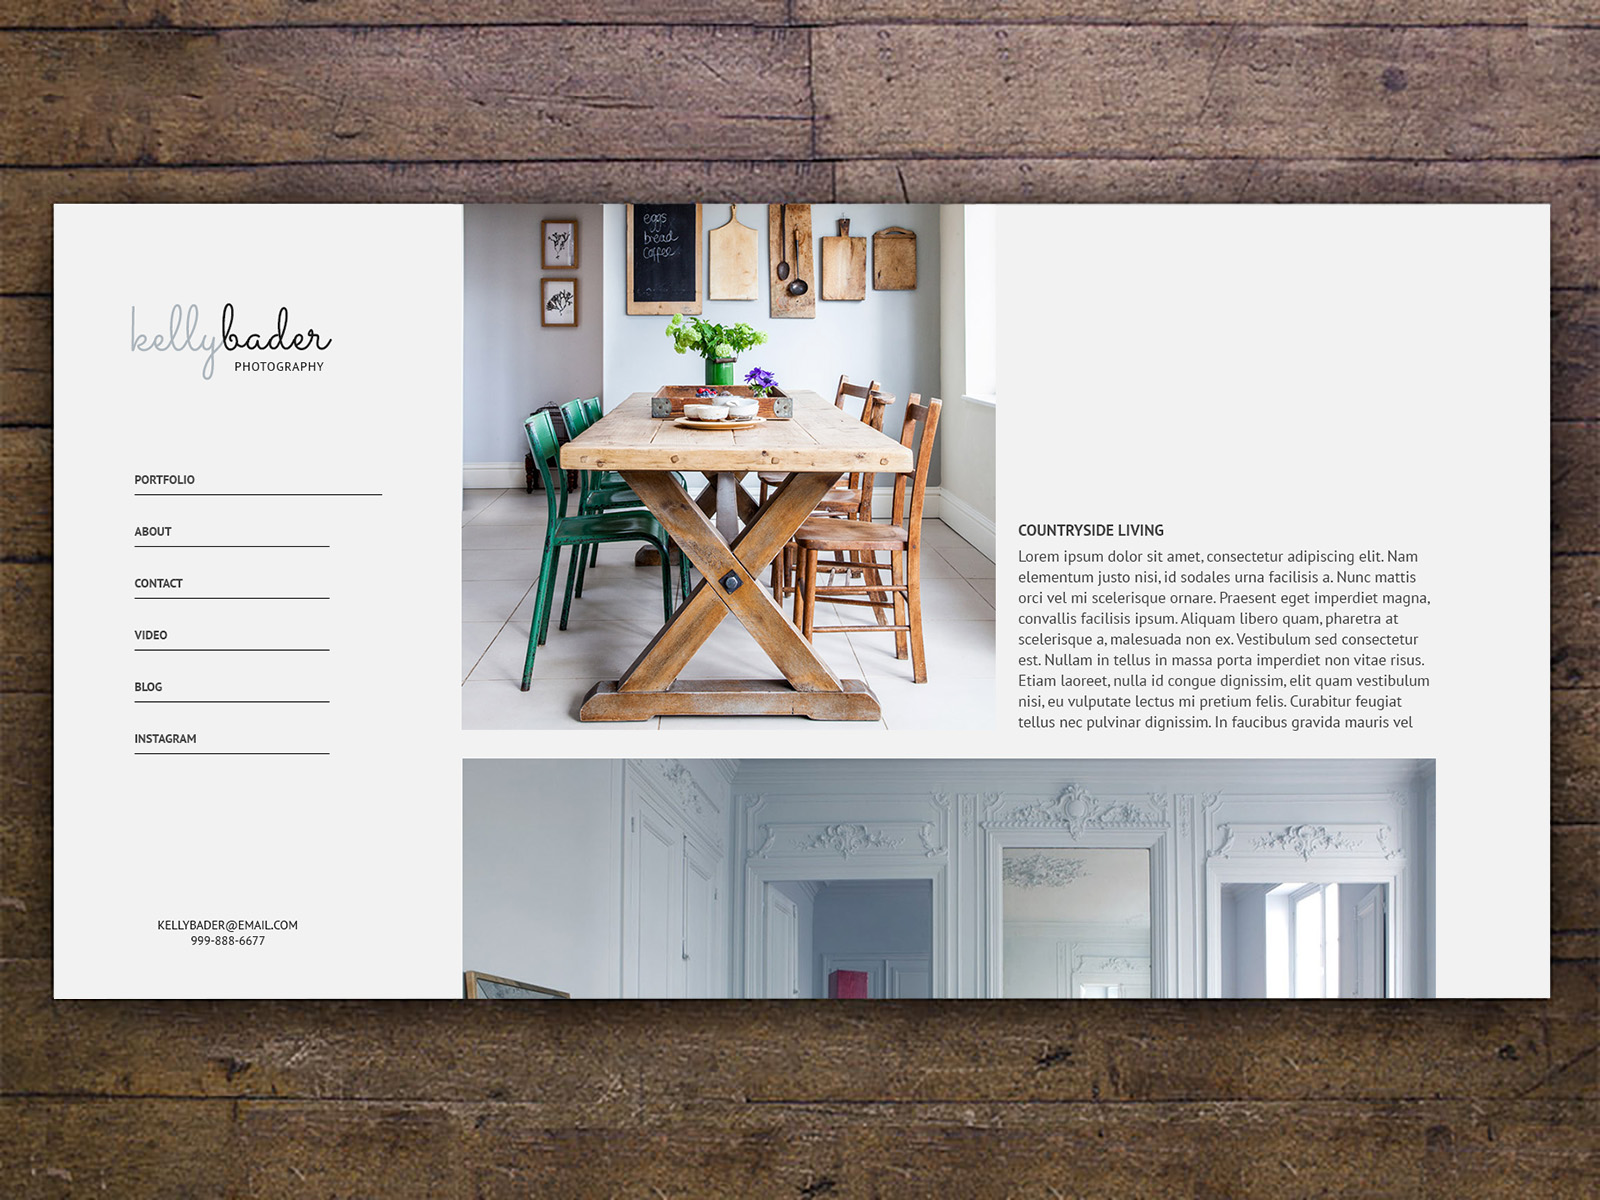 Photography portfolio with a left navigation and a collection of images in the center-right area. The portfolio image on screen is of a room with a rustic wooden table and chairs. The entire portfolio is superimposed on a wooden texture.